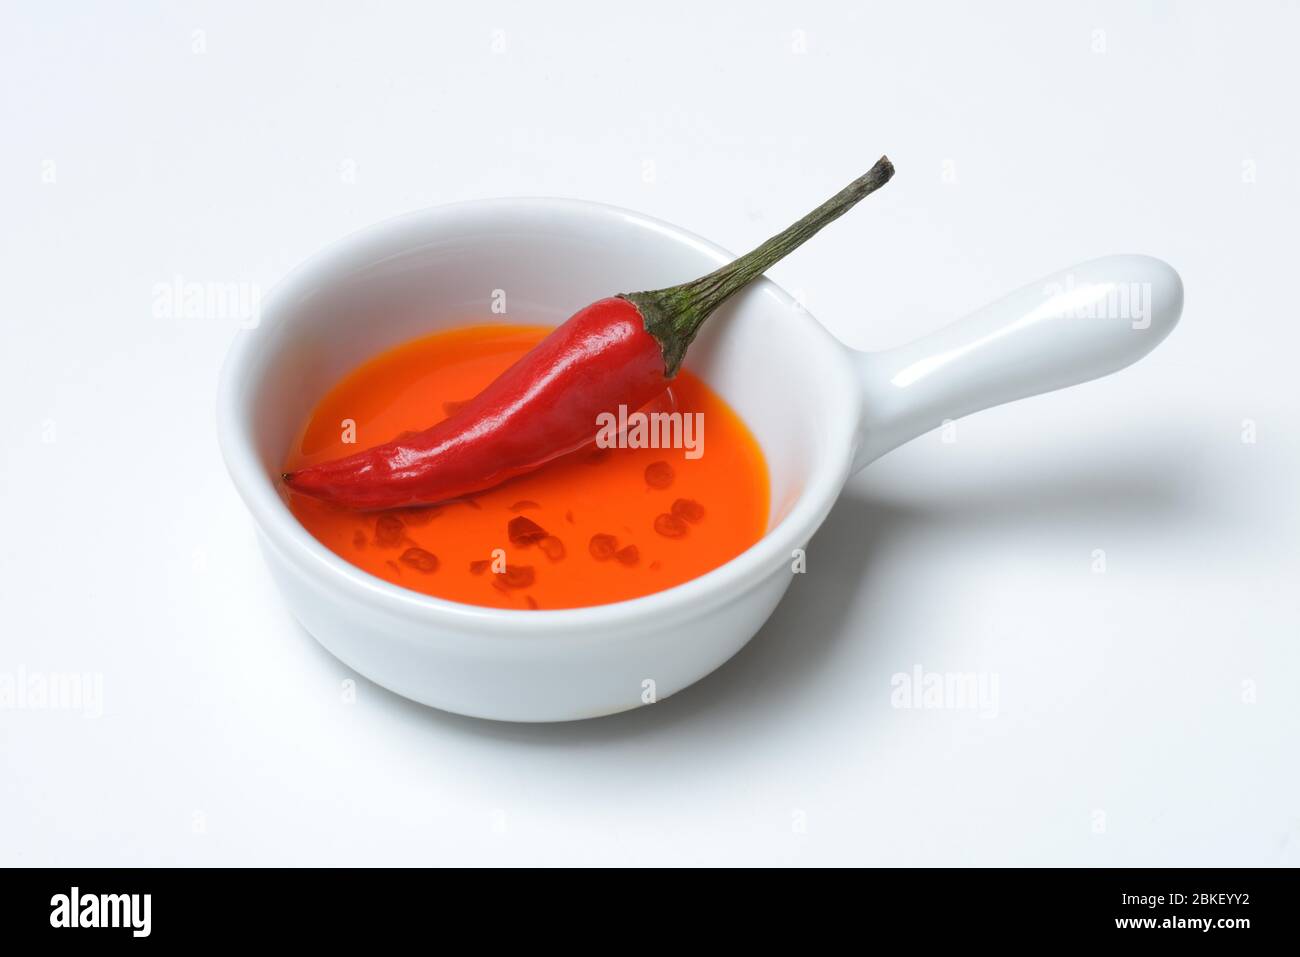 Chili oil and chili pepper in ceramic vessel, food photography, studio shot, Germany Stock Photo